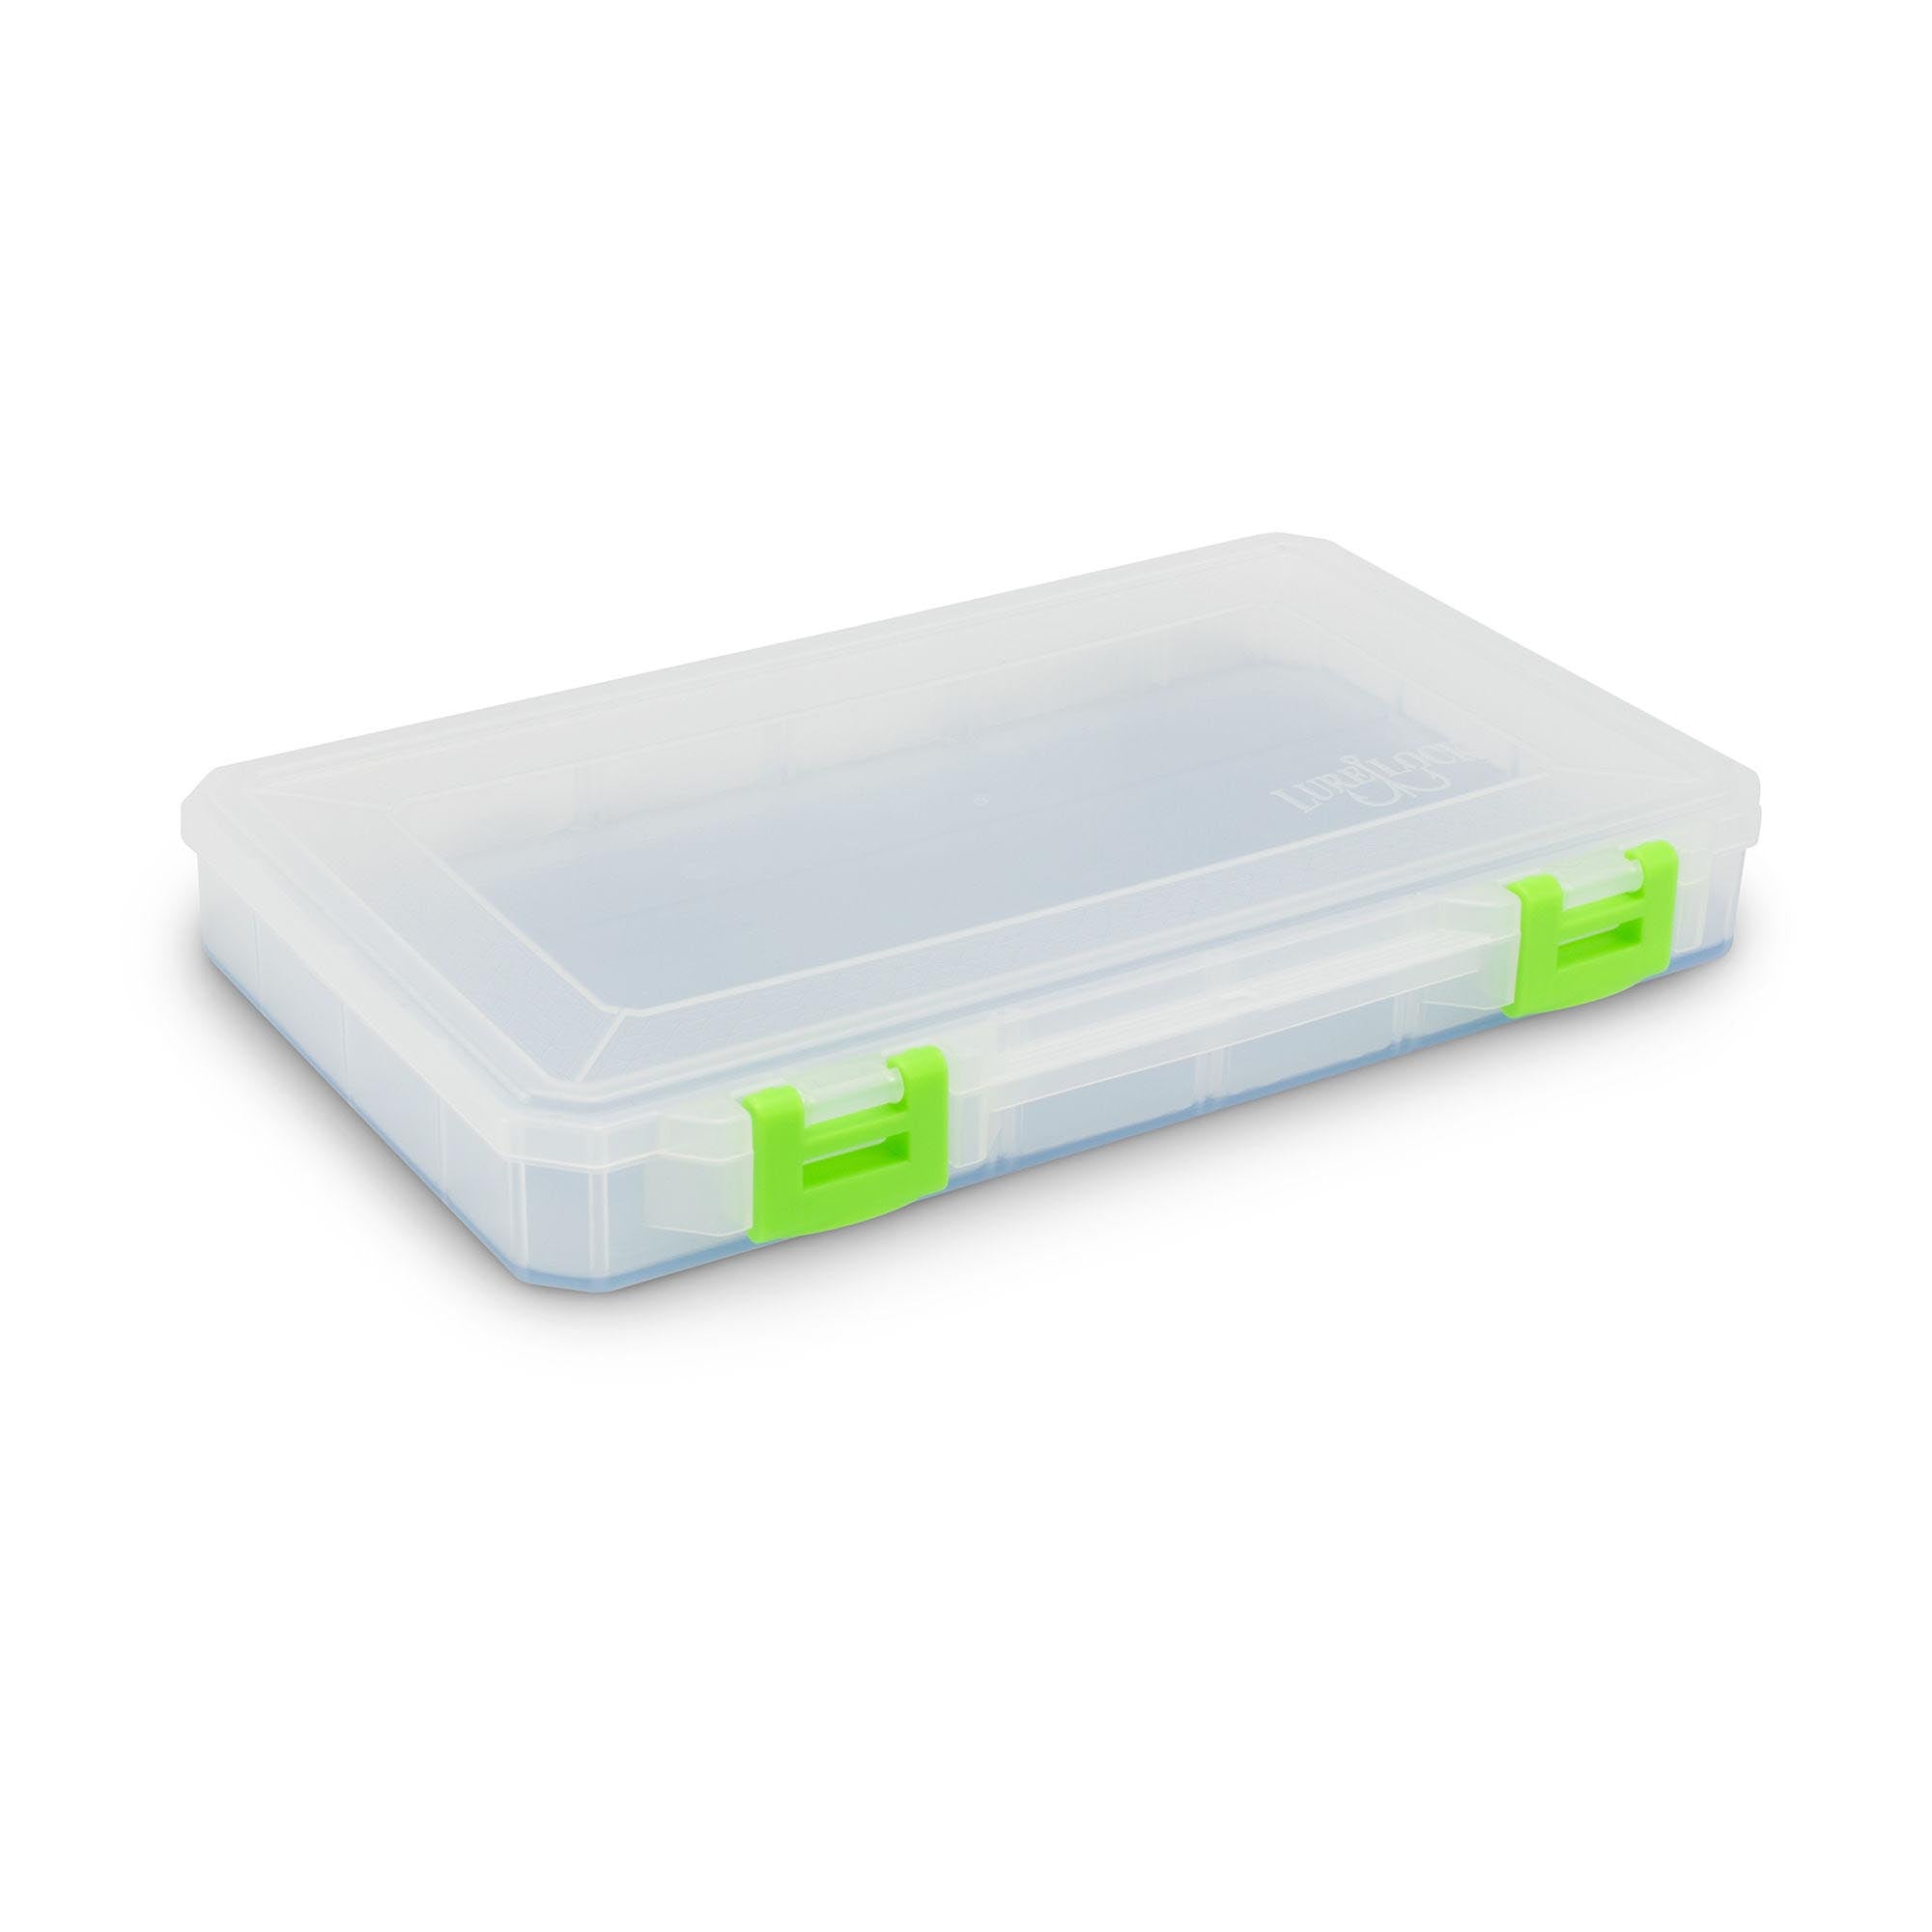  Sjqecyfv Large Tackle Box Double Layer Tackle Box